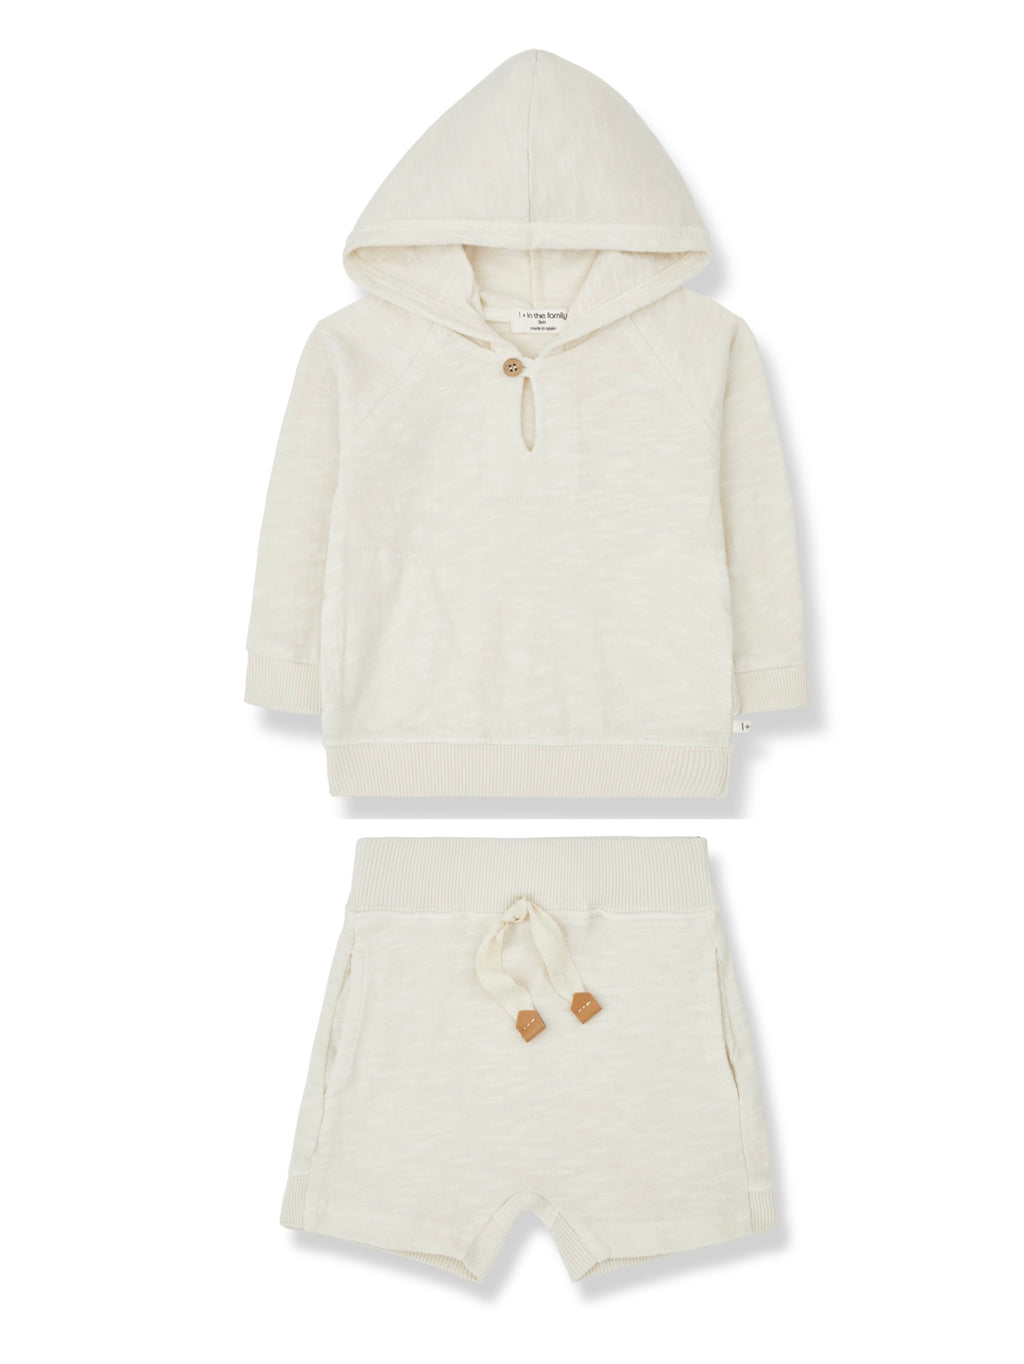 1 + In the Family Marcello Top and Gino Short Sweatsuit Set - Ivory